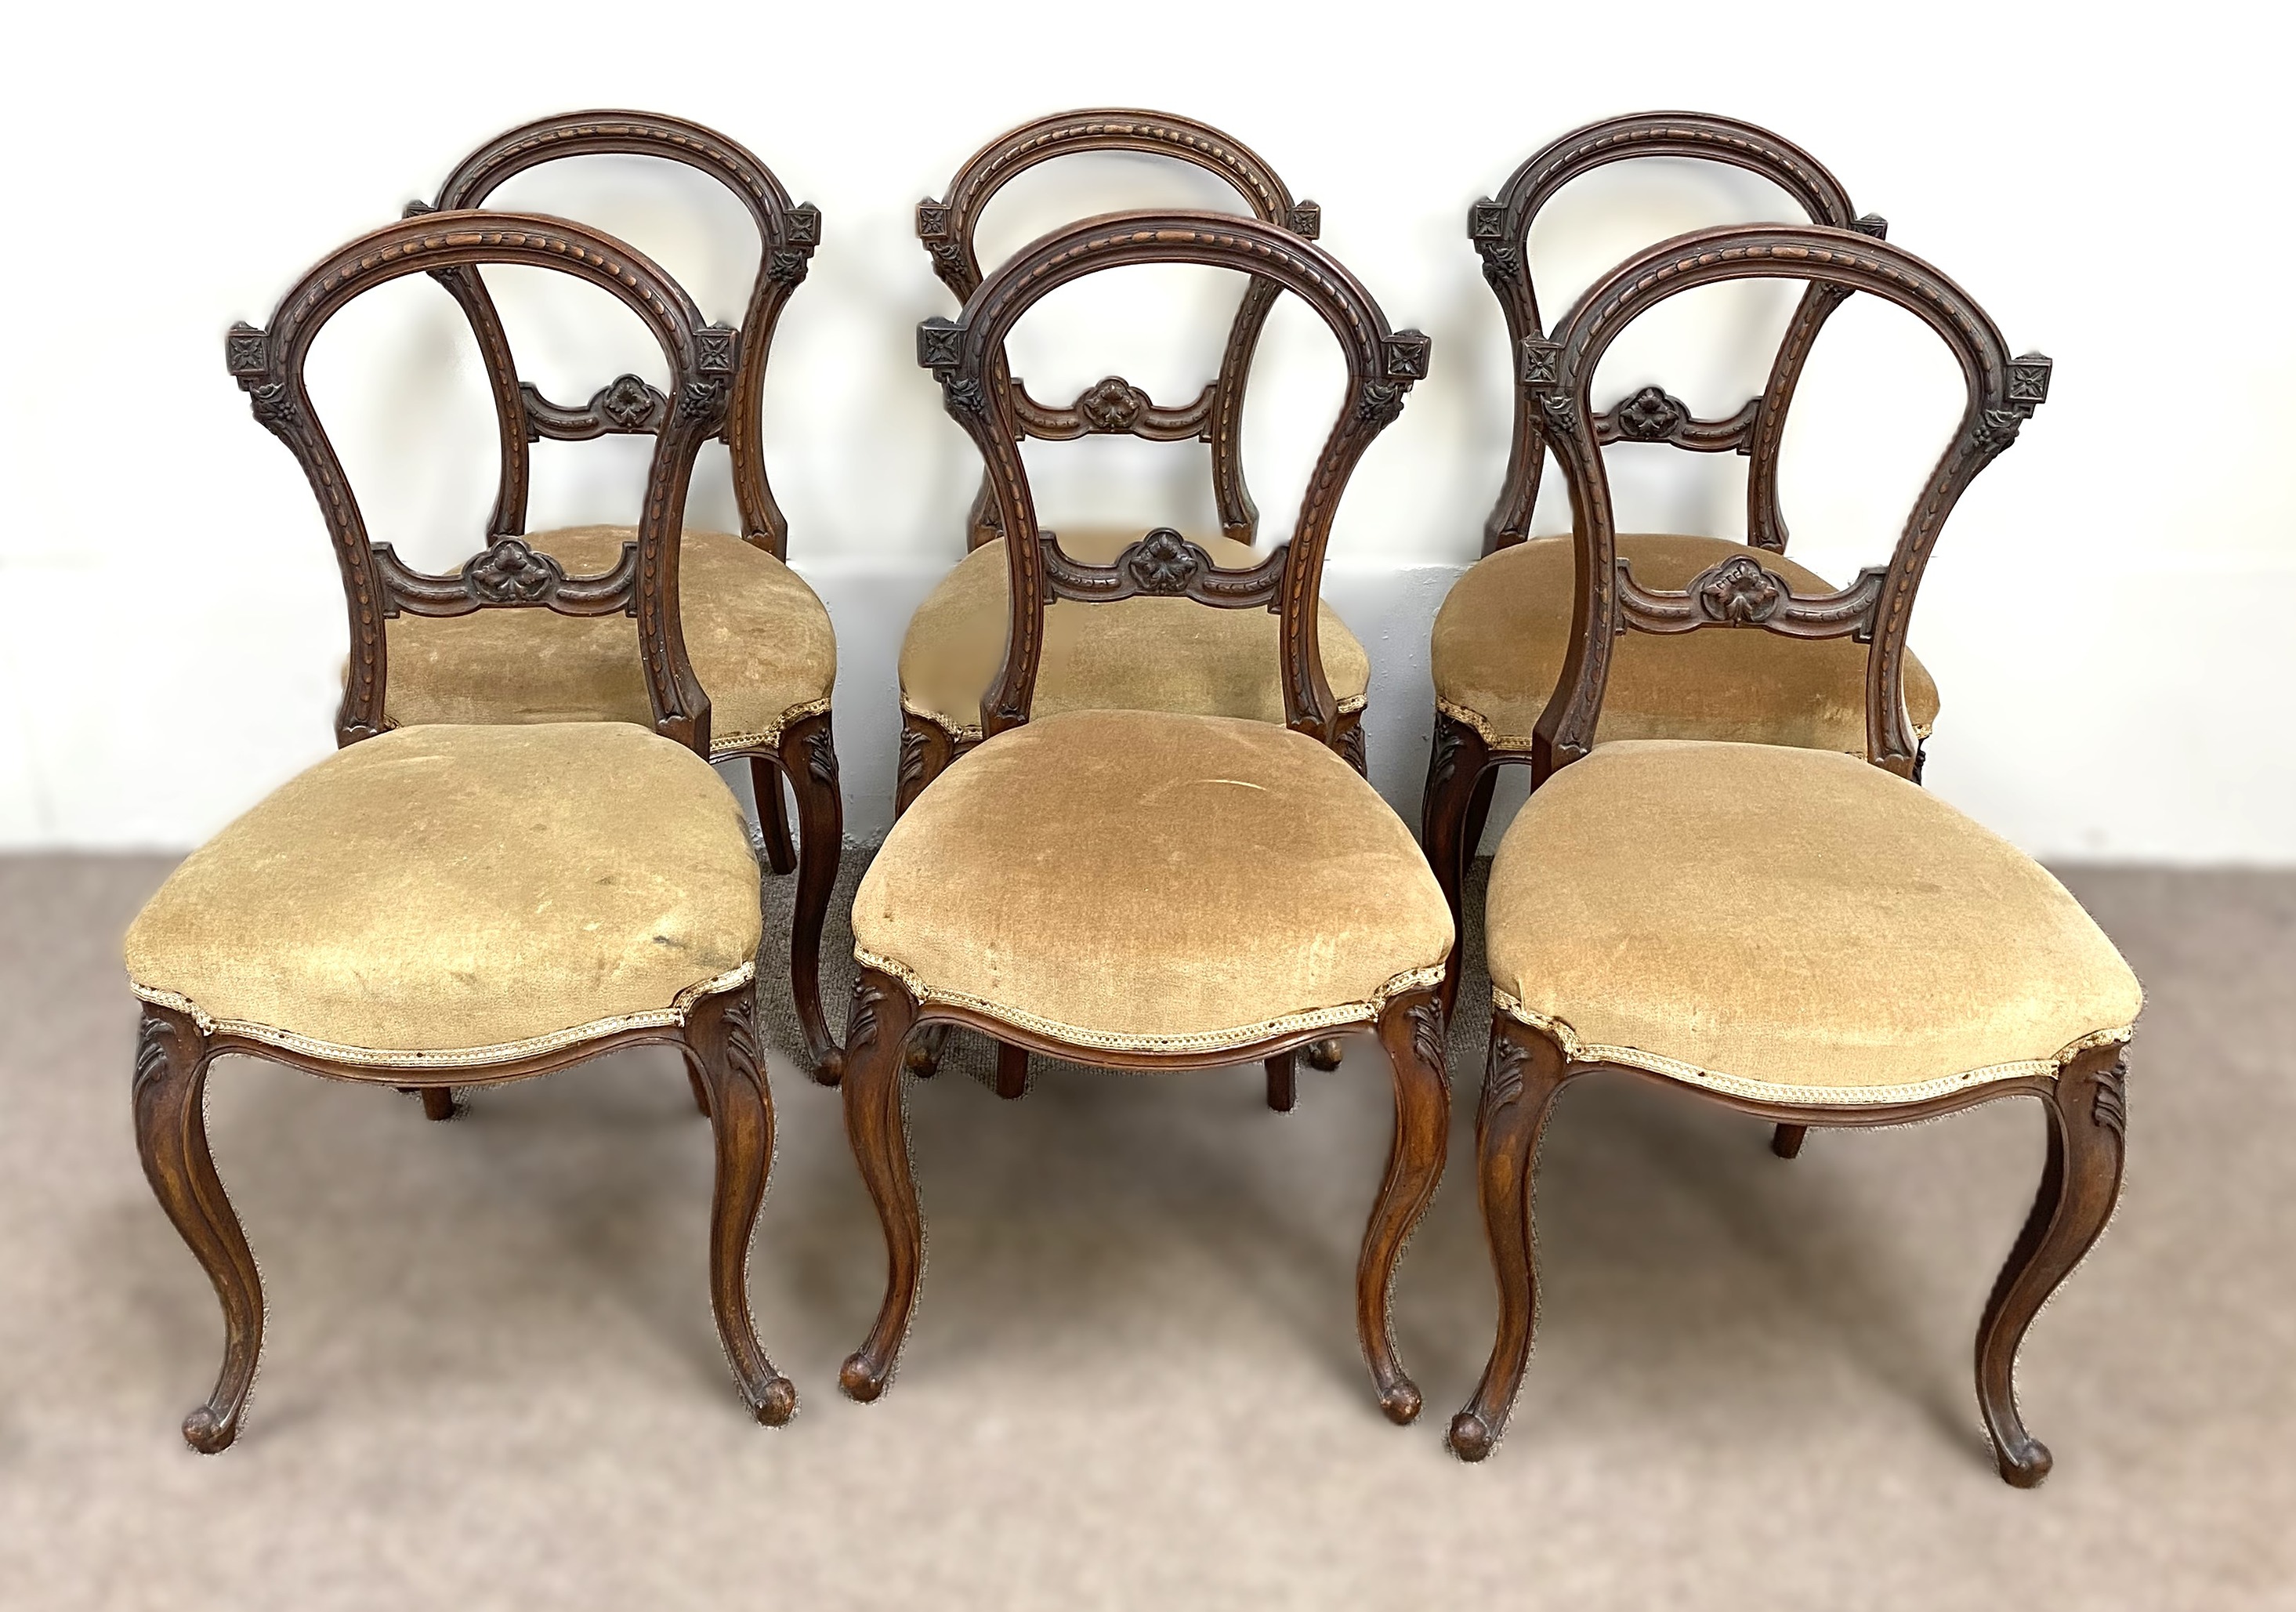 A set of six mid Victorian hoop backed dining chairs, with moulded frames and beige fabric stuffed-